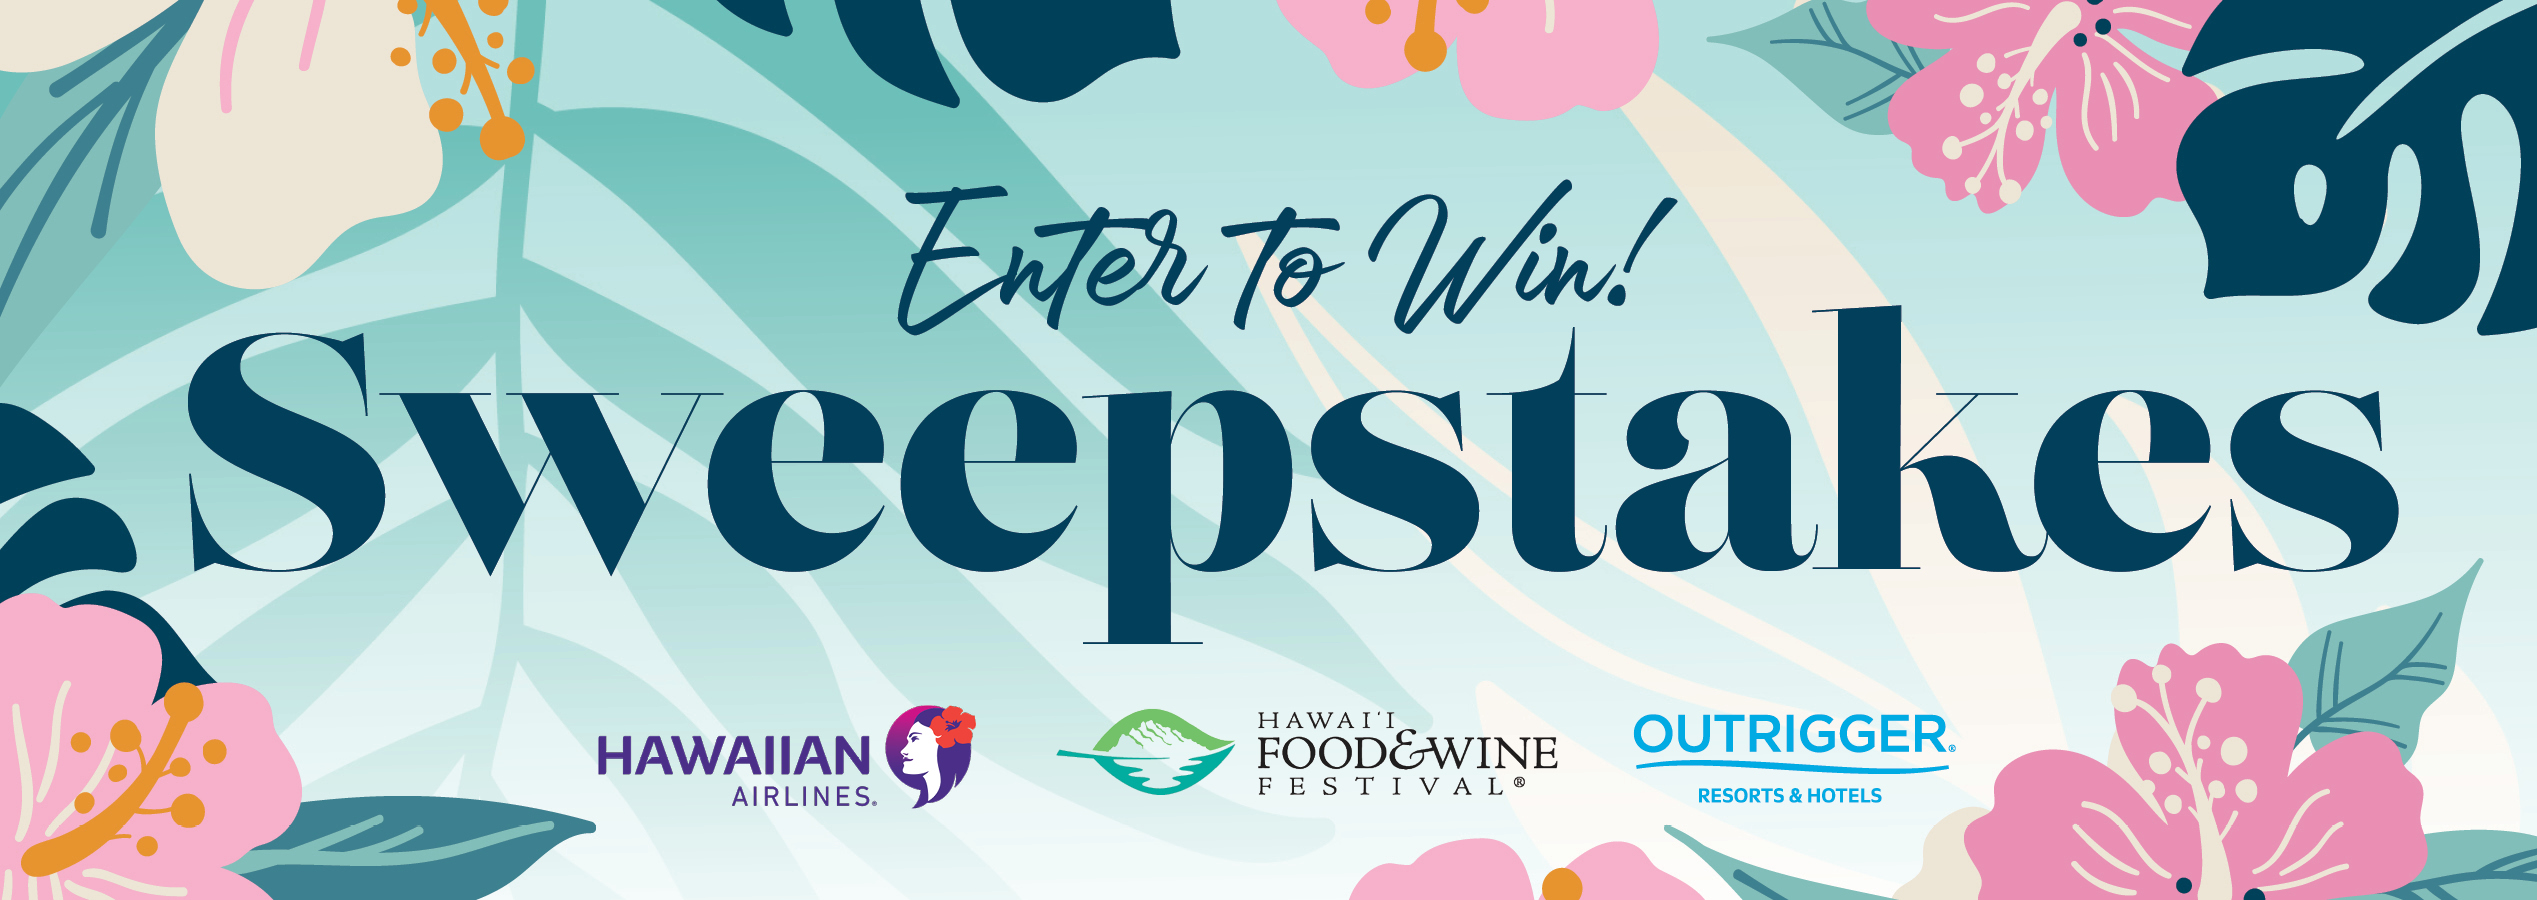 Enter to Win! Sweepstakes, Hawaiian Airlines, Hawaii Food & Wine Festival and Outrigger Resorts and Hotels